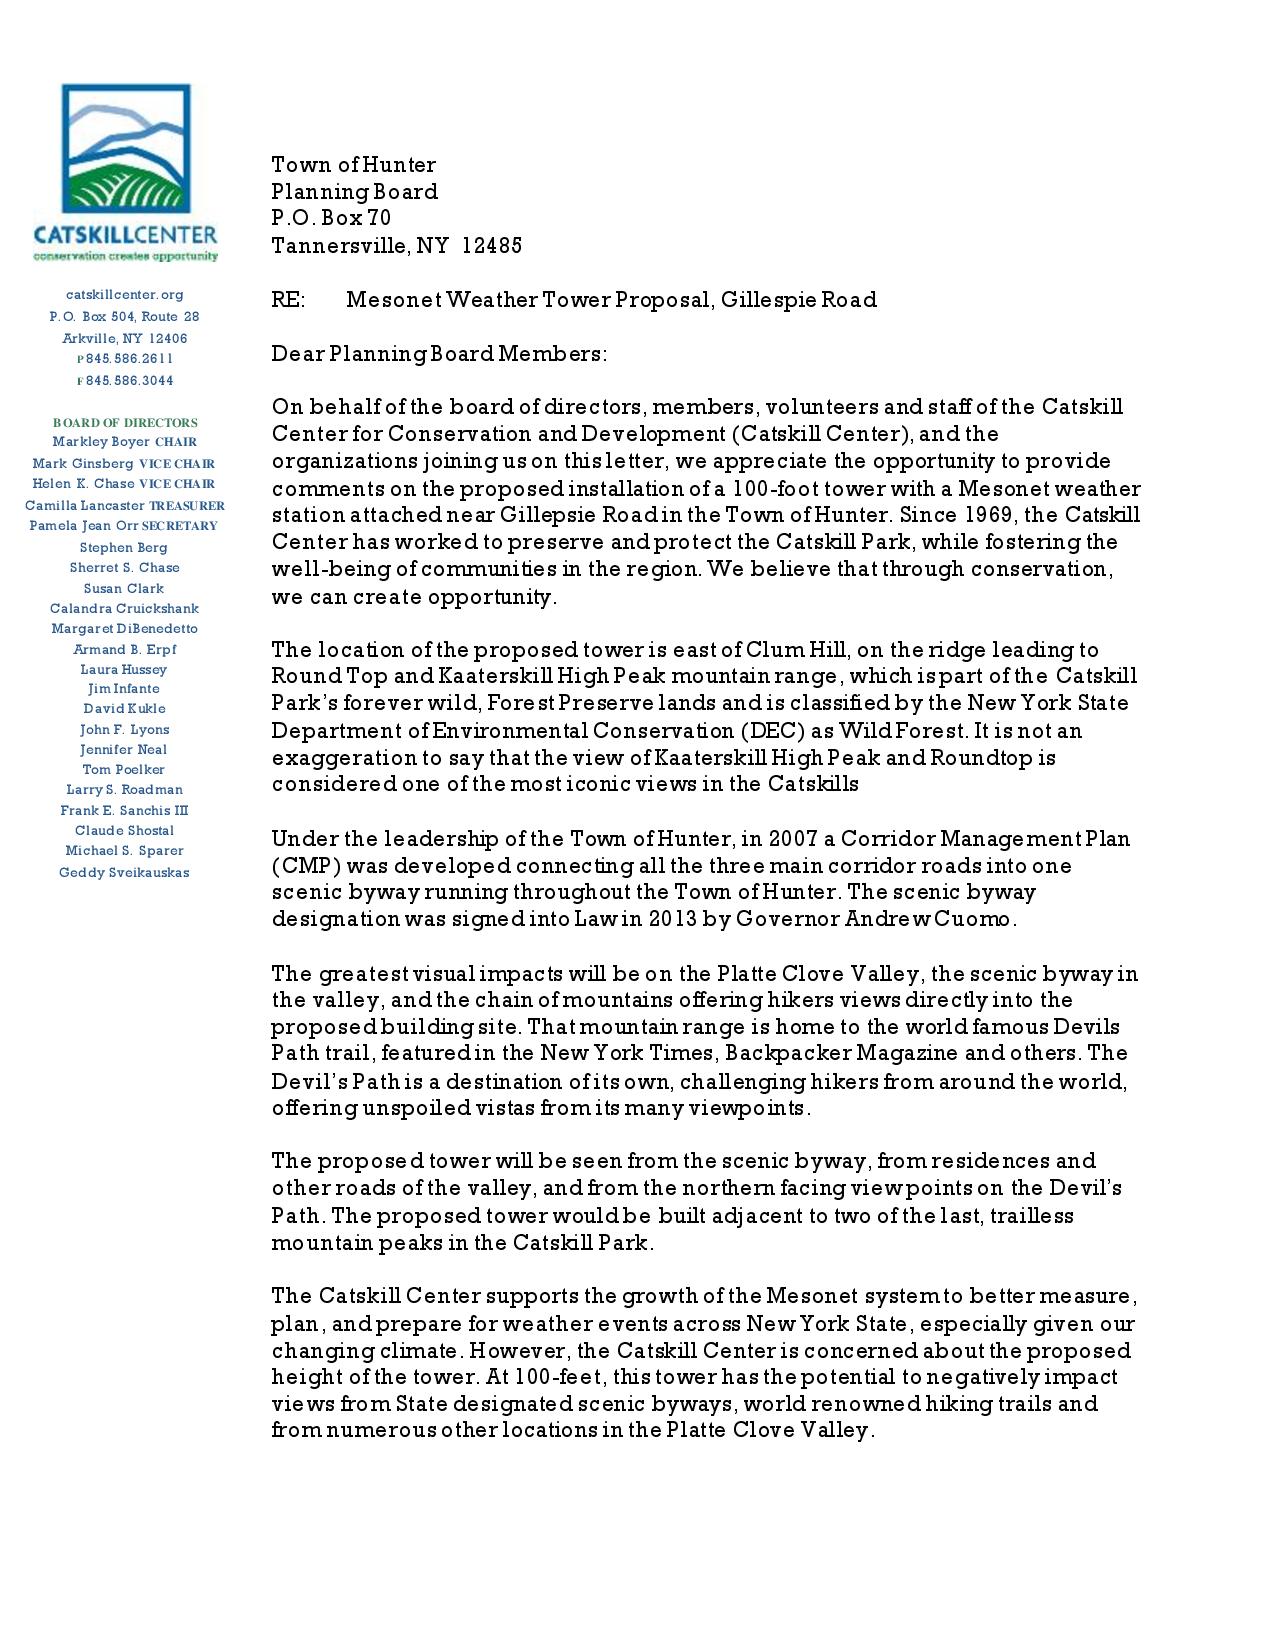 20161004 Catskill Center and Partners - TownOfHunterPlanningBoardMesonetCommentLetter-page-001.jpg